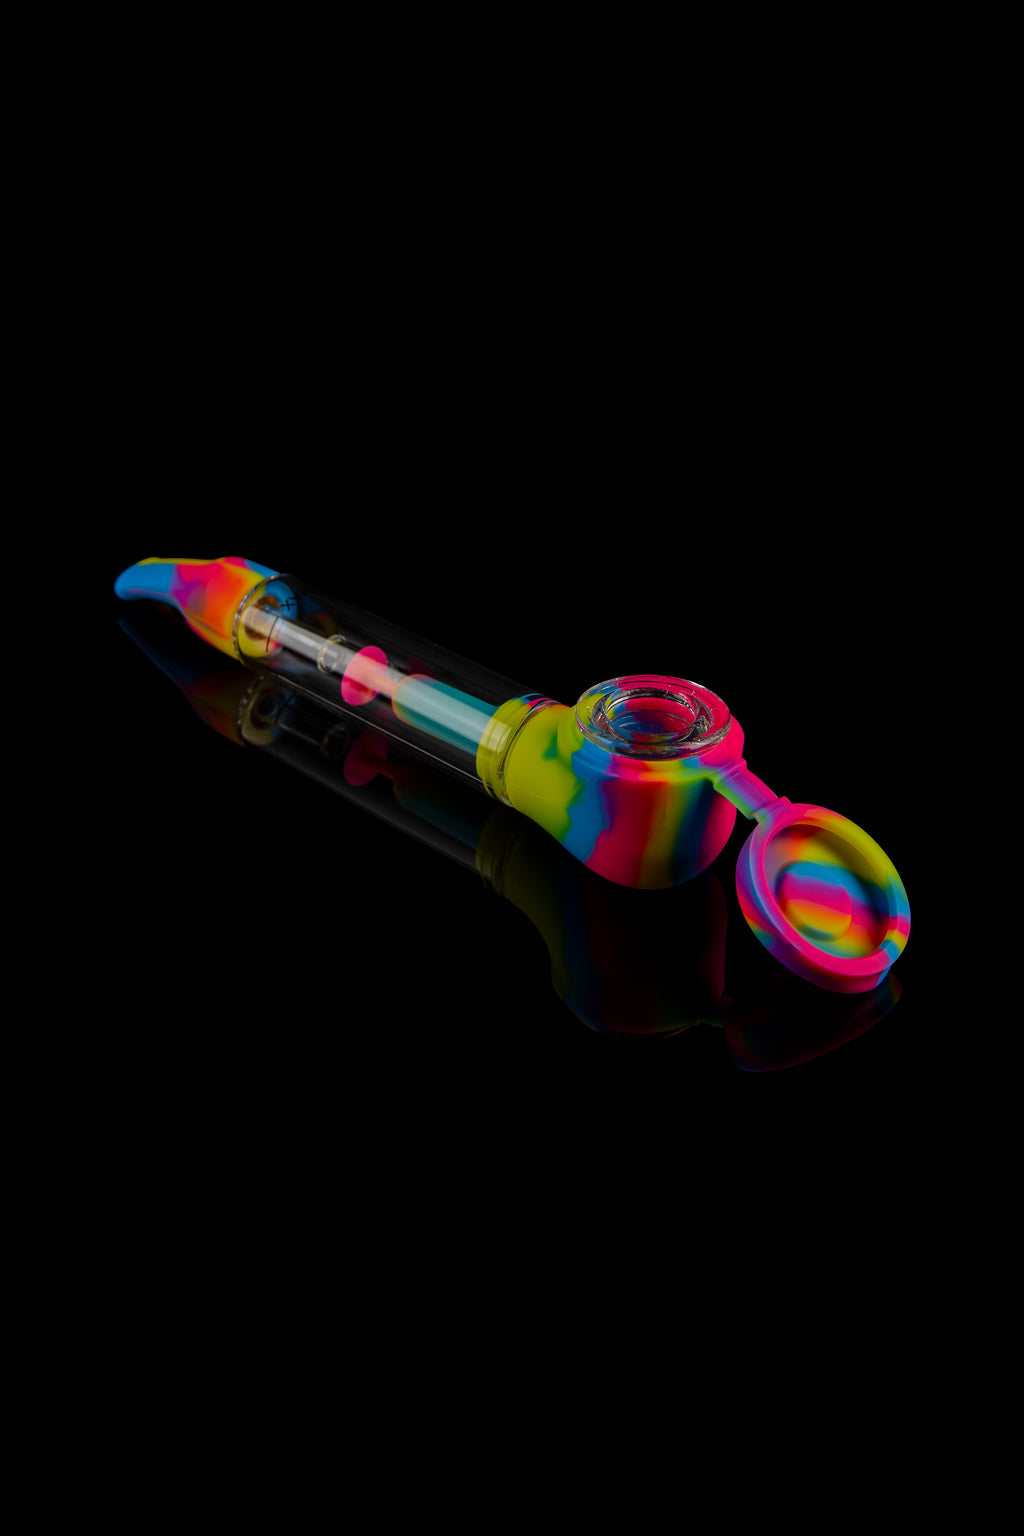 Silicone Cup To-Go Water Pipe – Smoke Station